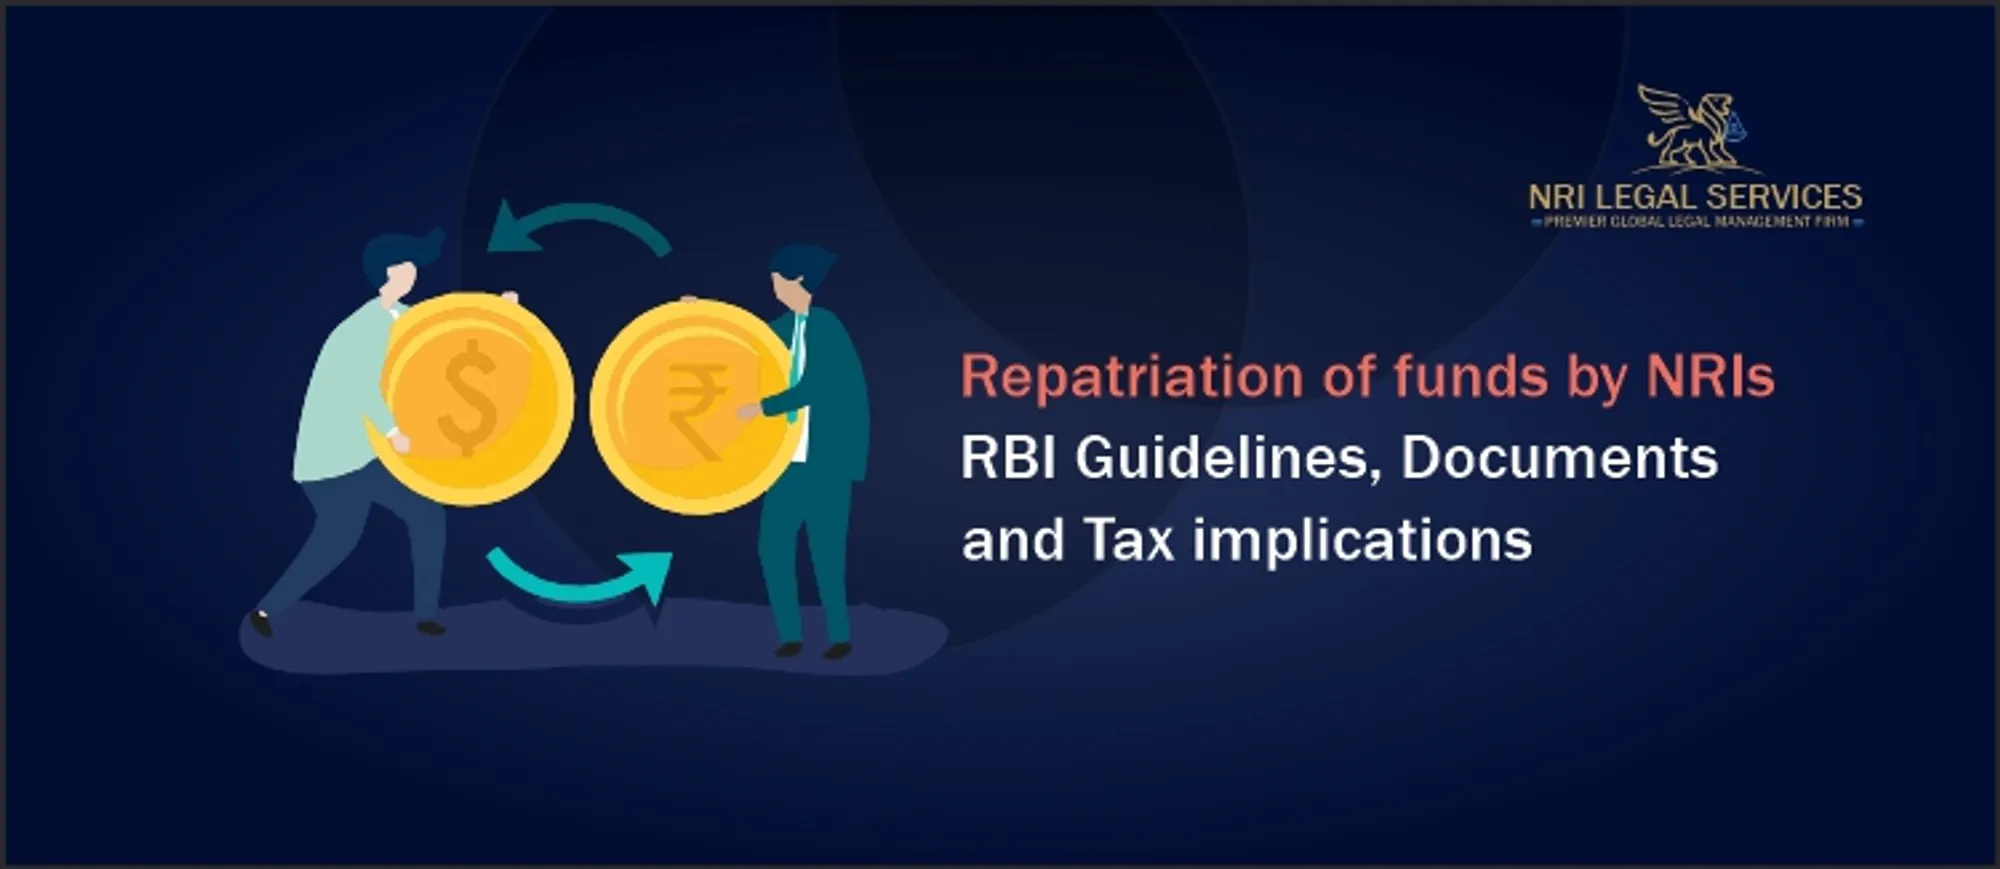 Repatriation of funds by NRIs RBI guidelines documents and Tax implications